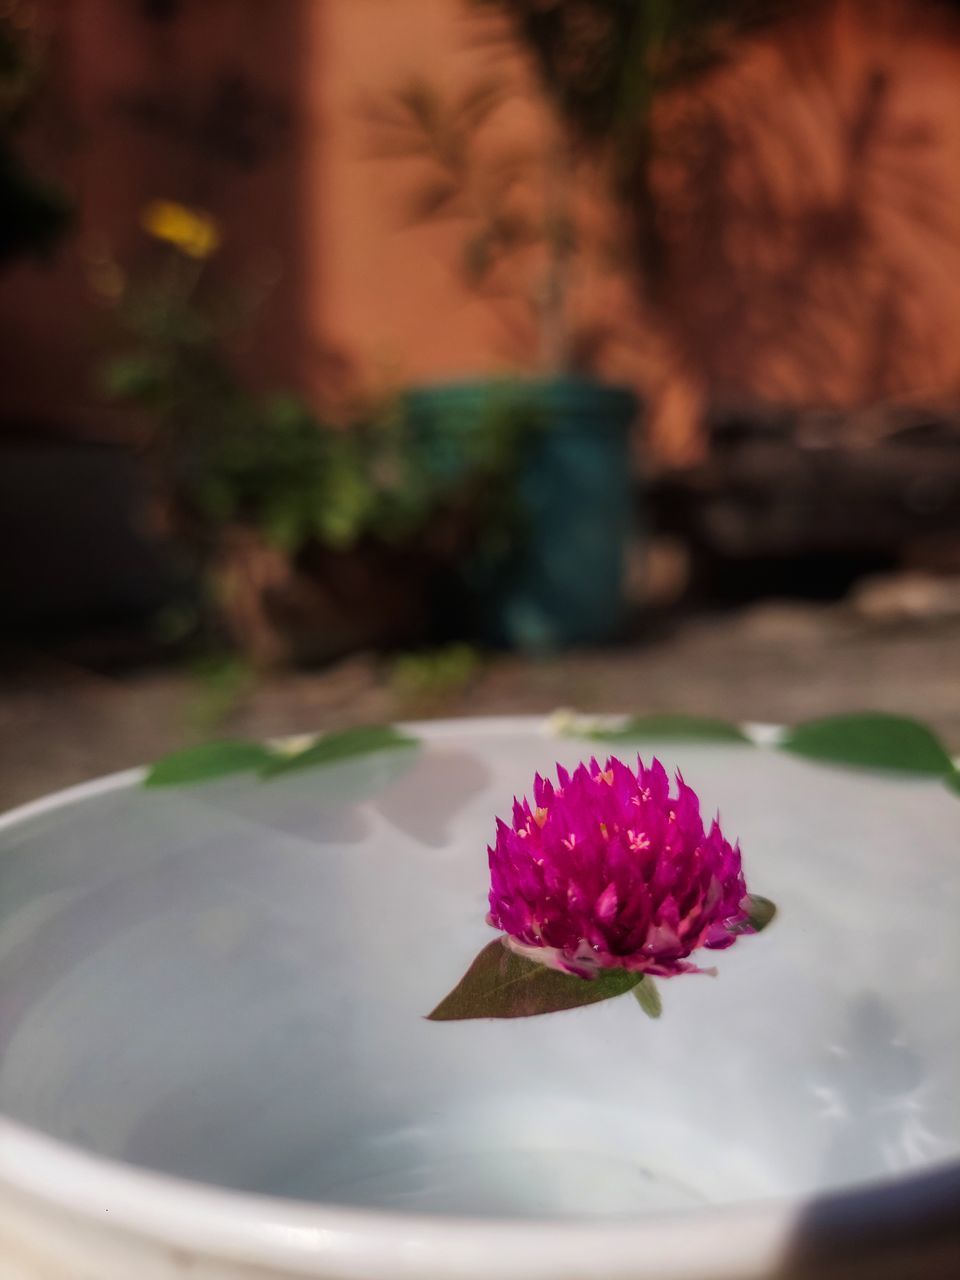 flower, flowering plant, plant, nature, freshness, beauty in nature, water, pink, no people, close-up, leaf, petal, flower head, focus on foreground, selective focus, outdoors, floristry, fragility, inflorescence, table, purple, food and drink, floating on water